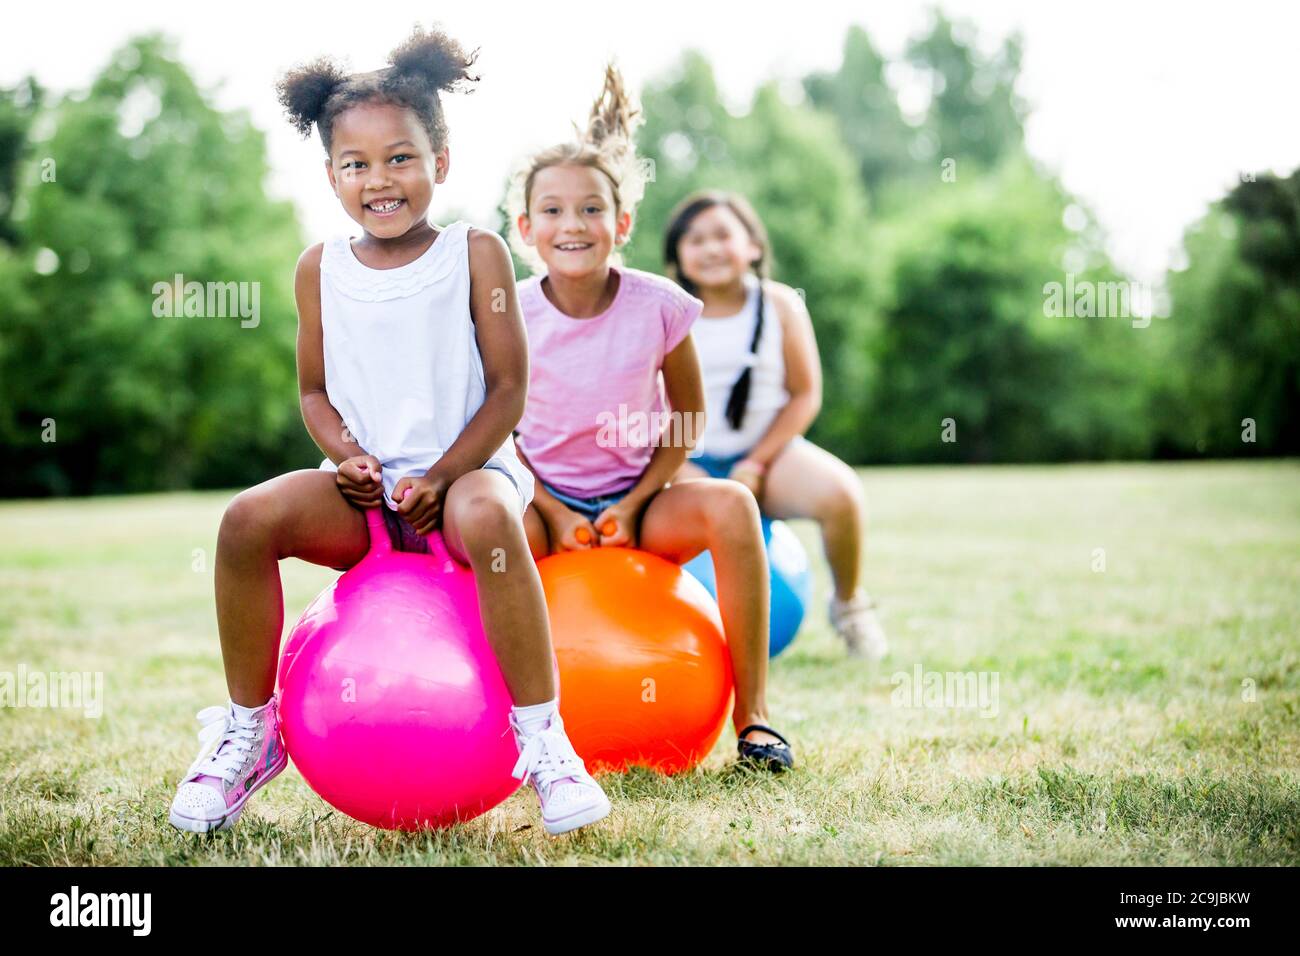 Girls bouncing on inflatable hopper in park, smiling. Stock Photo